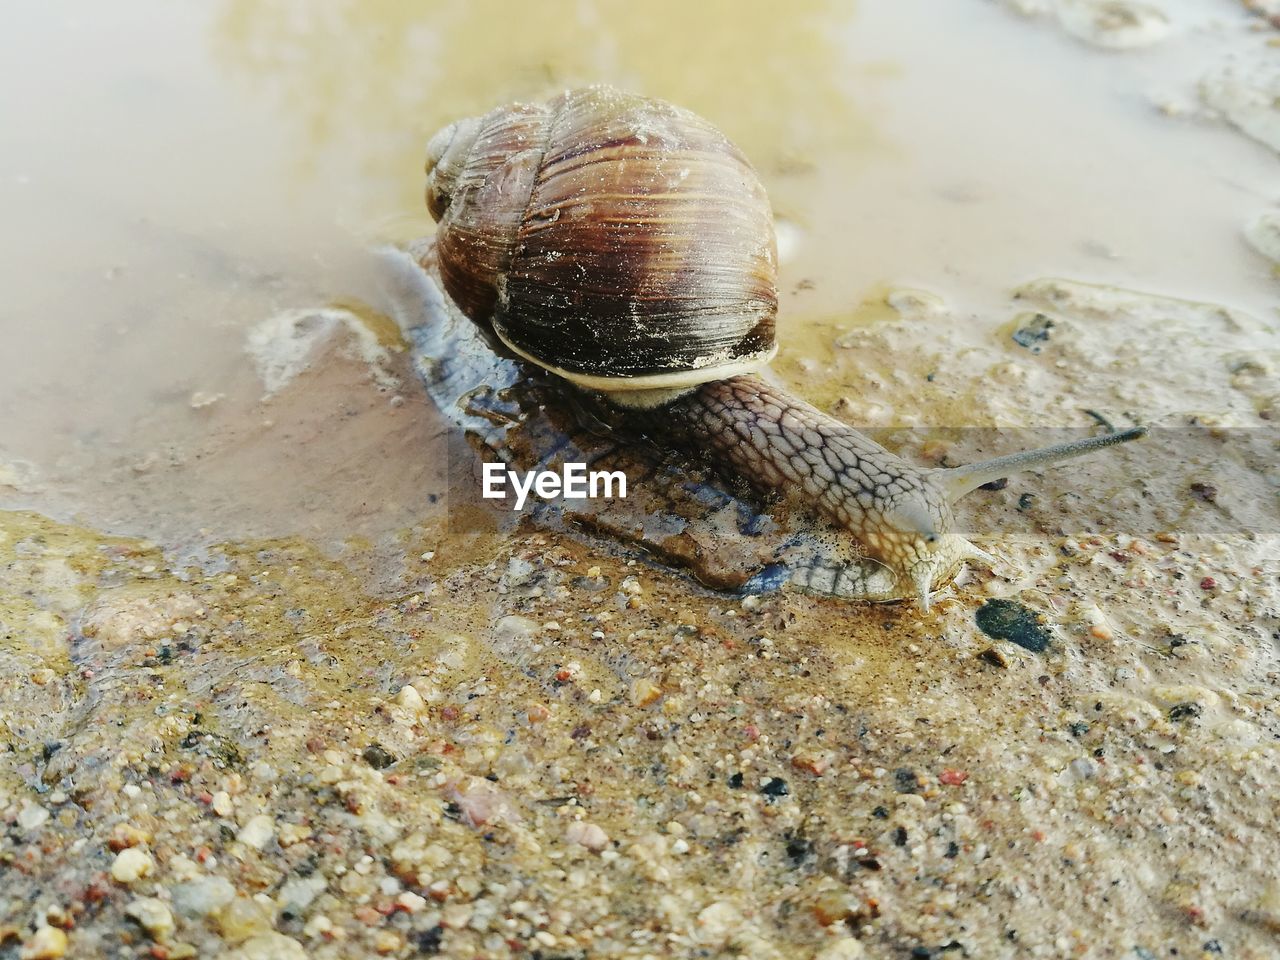 High angle view of snail on shore